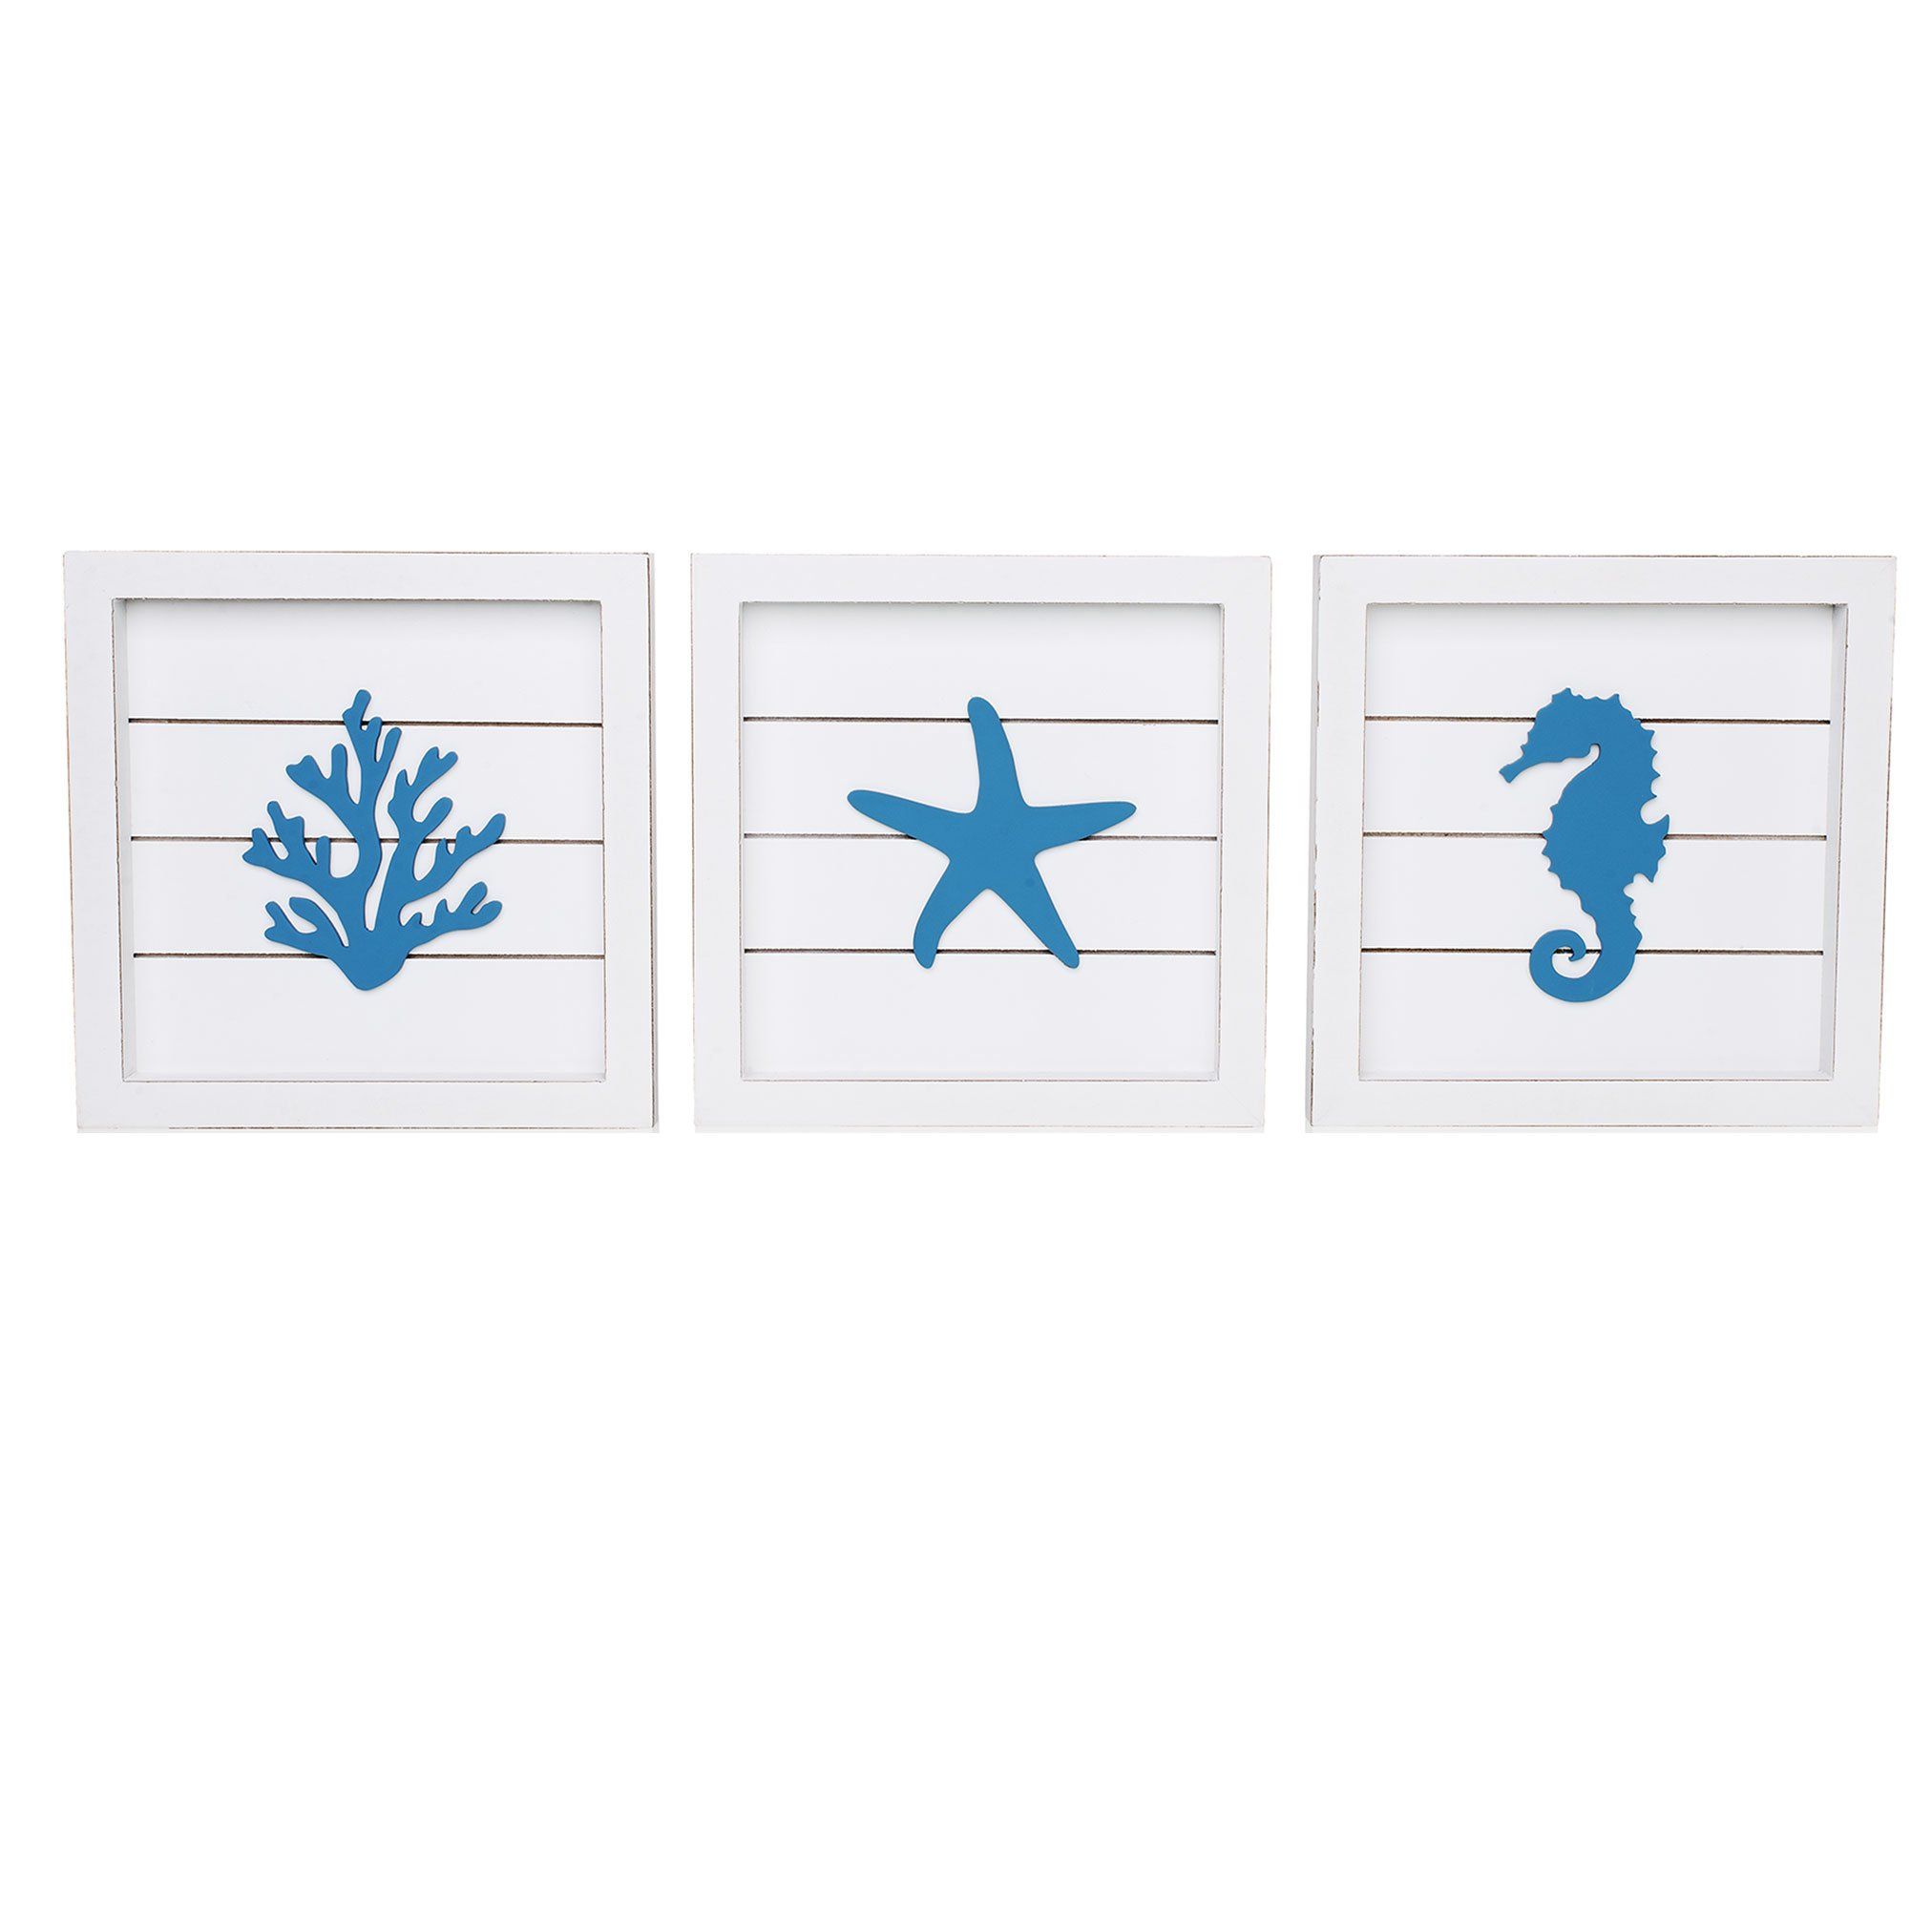 Buy Wooden Beach Plaque Nautical Marine Decoration Ocean Beach Wall Decor  Beach House Welcome Sign Seaside Online | Kogan.com.  DescriptionManufactured with wood and hemp rope material which is durable  and safe for